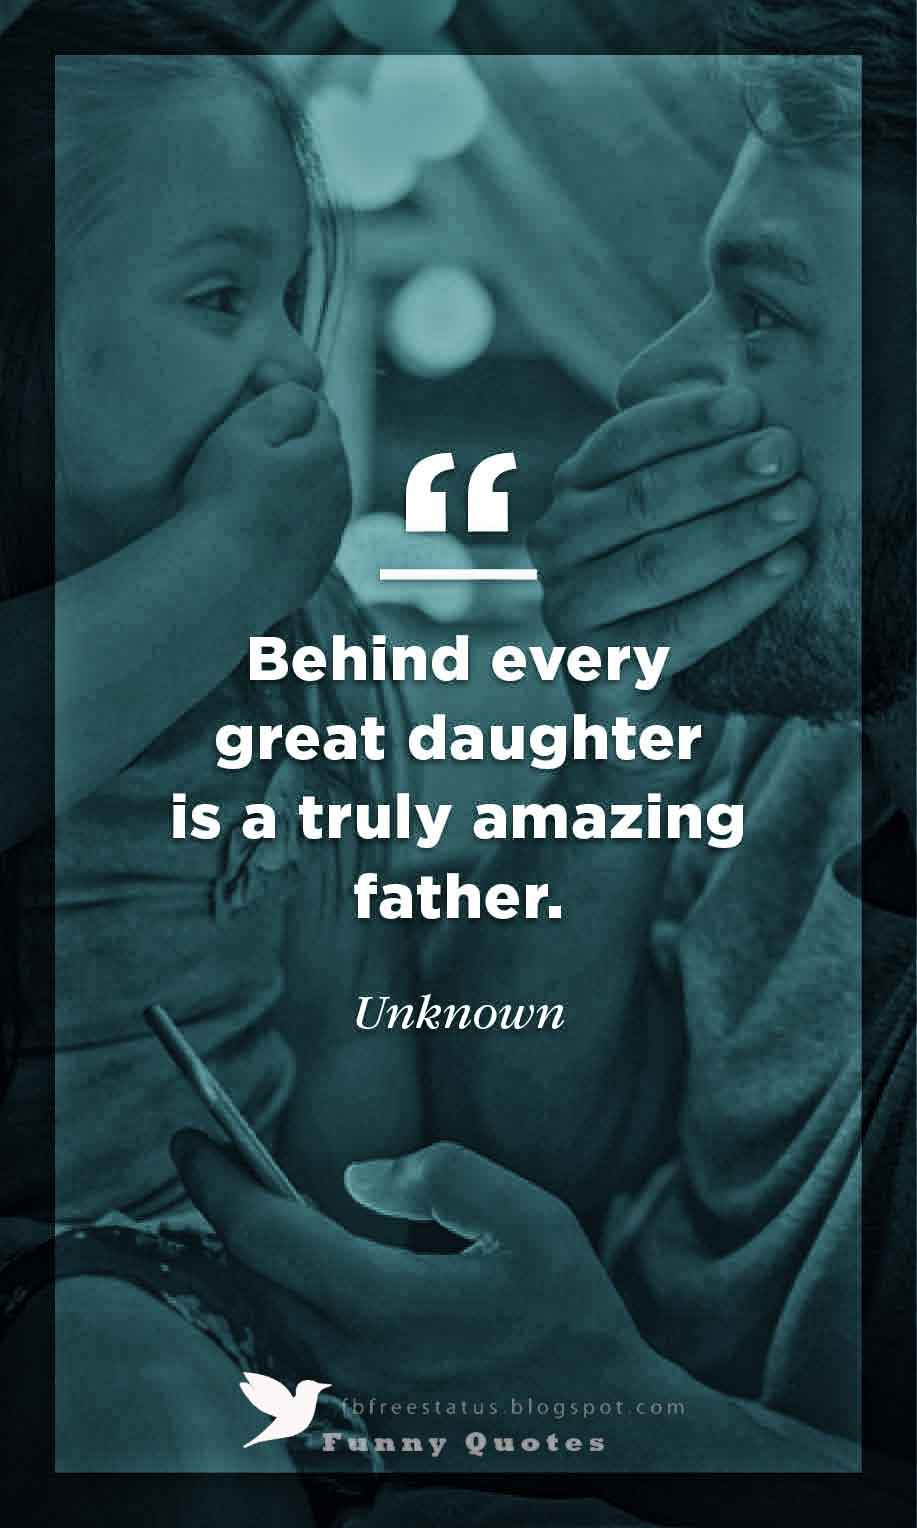 Inspirational Fatherhood Quotes
 Inspirational Fathers Day Quotes with